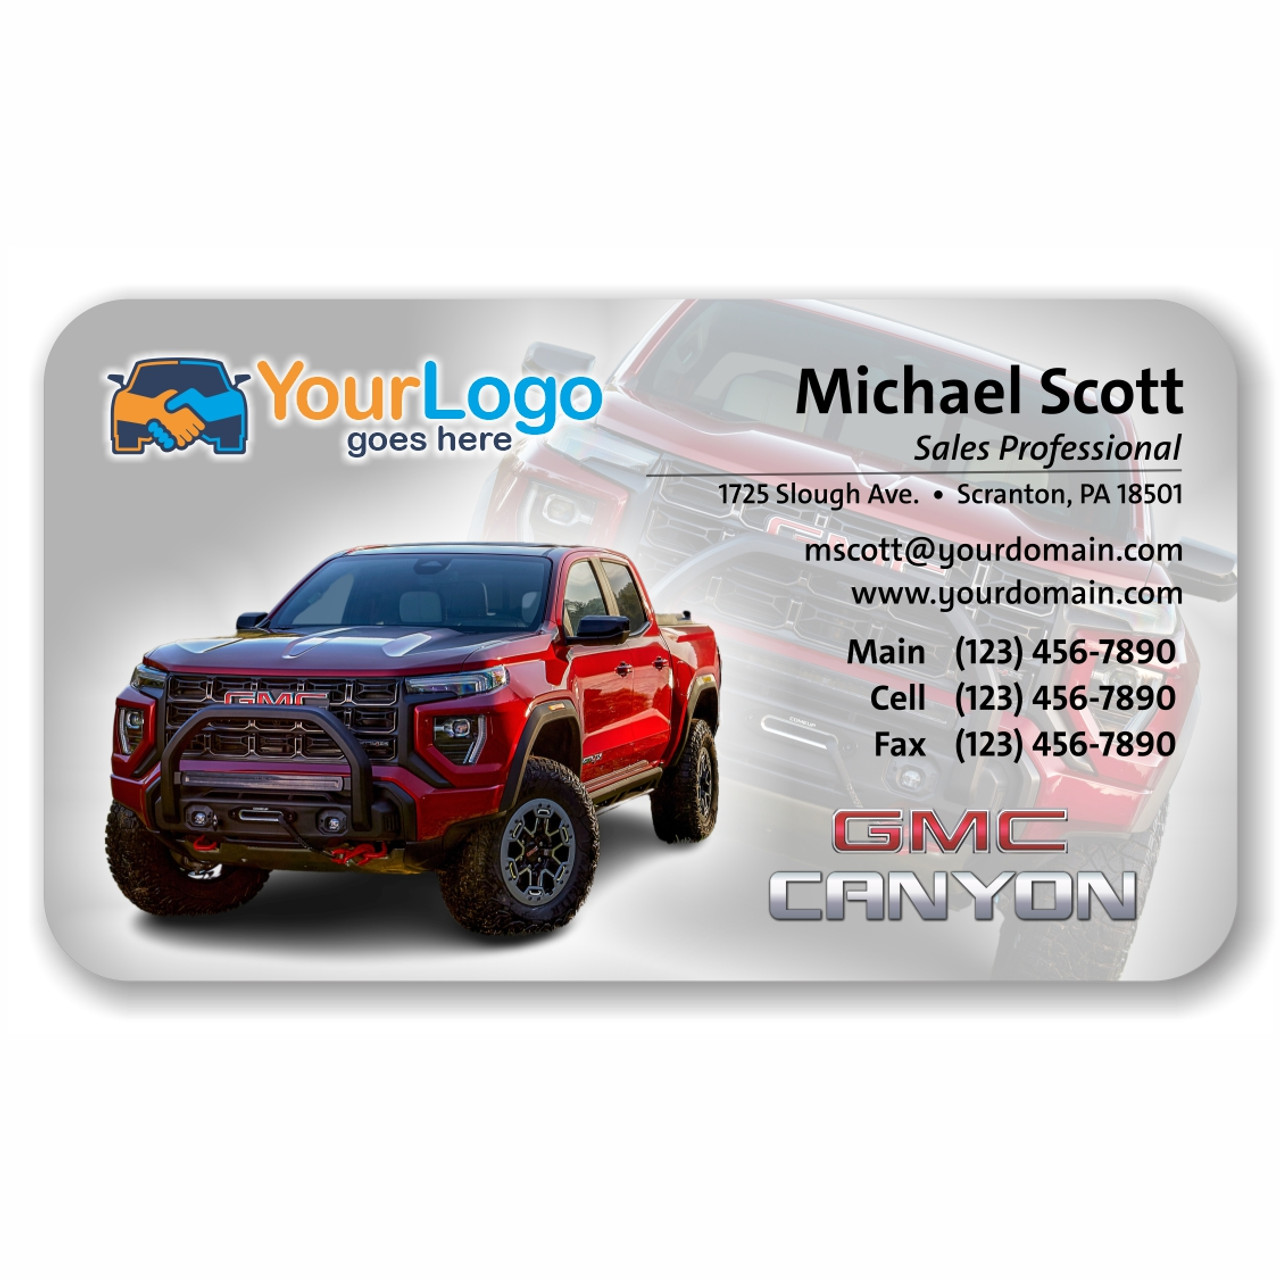 GMC Canyon 02 Business Cards